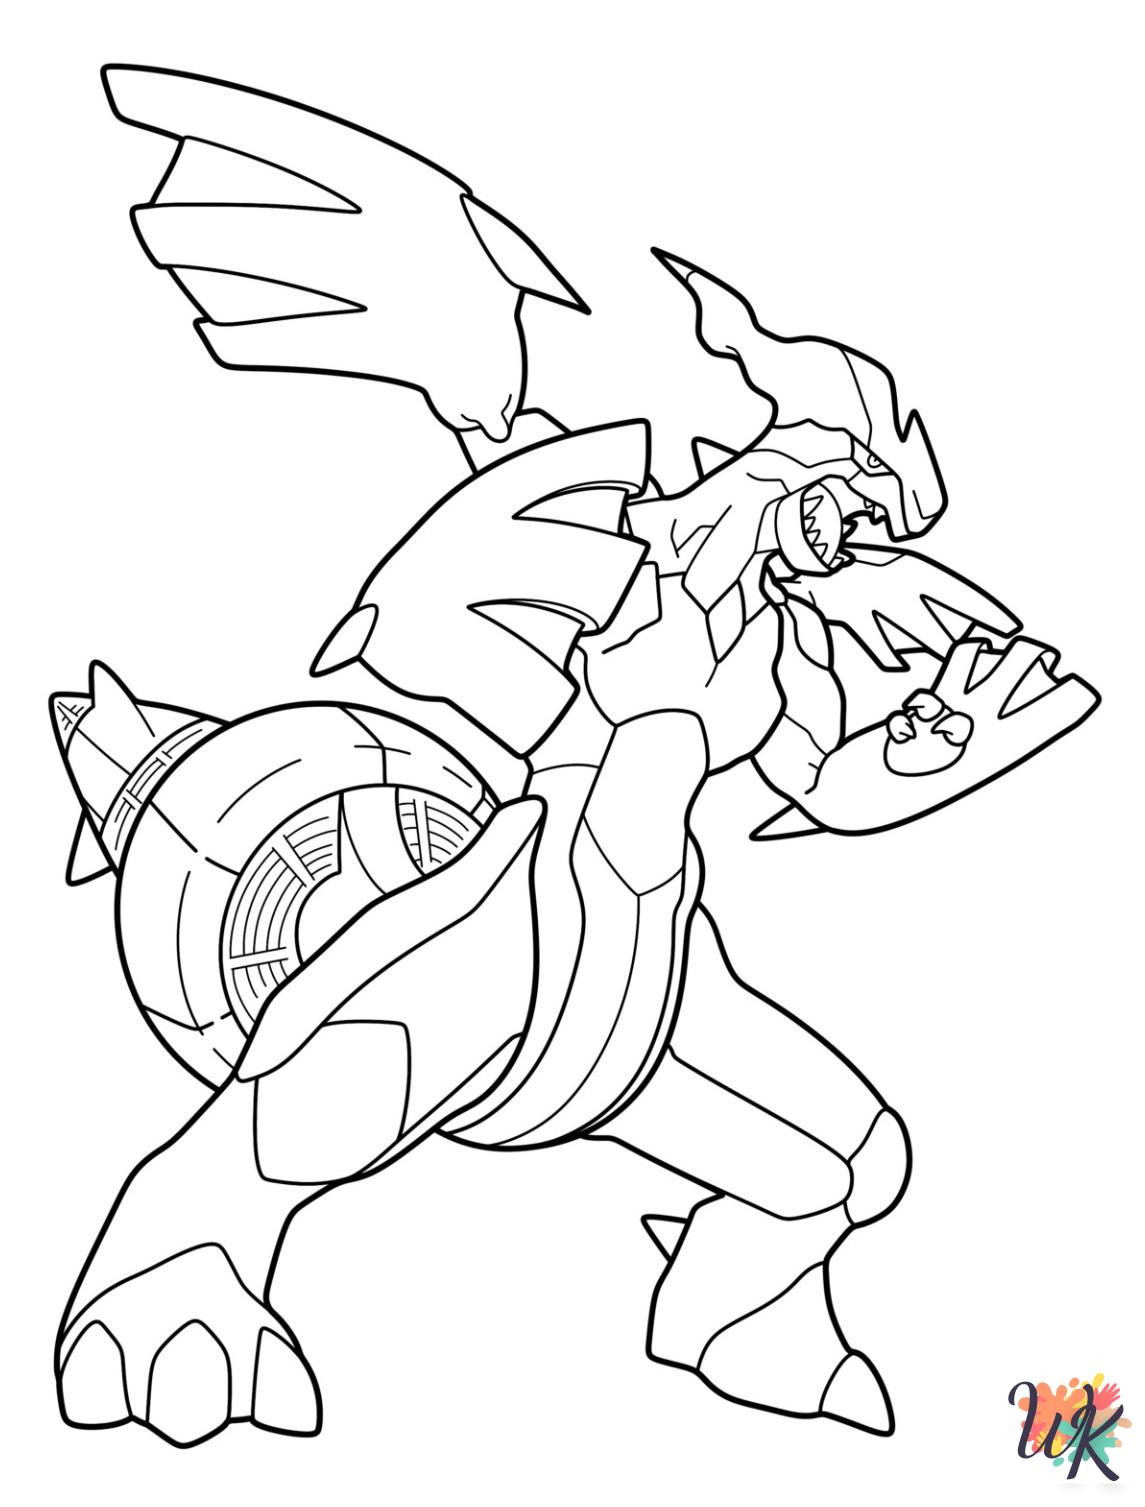 Legendary Pokemon coloring pages for adults pdf